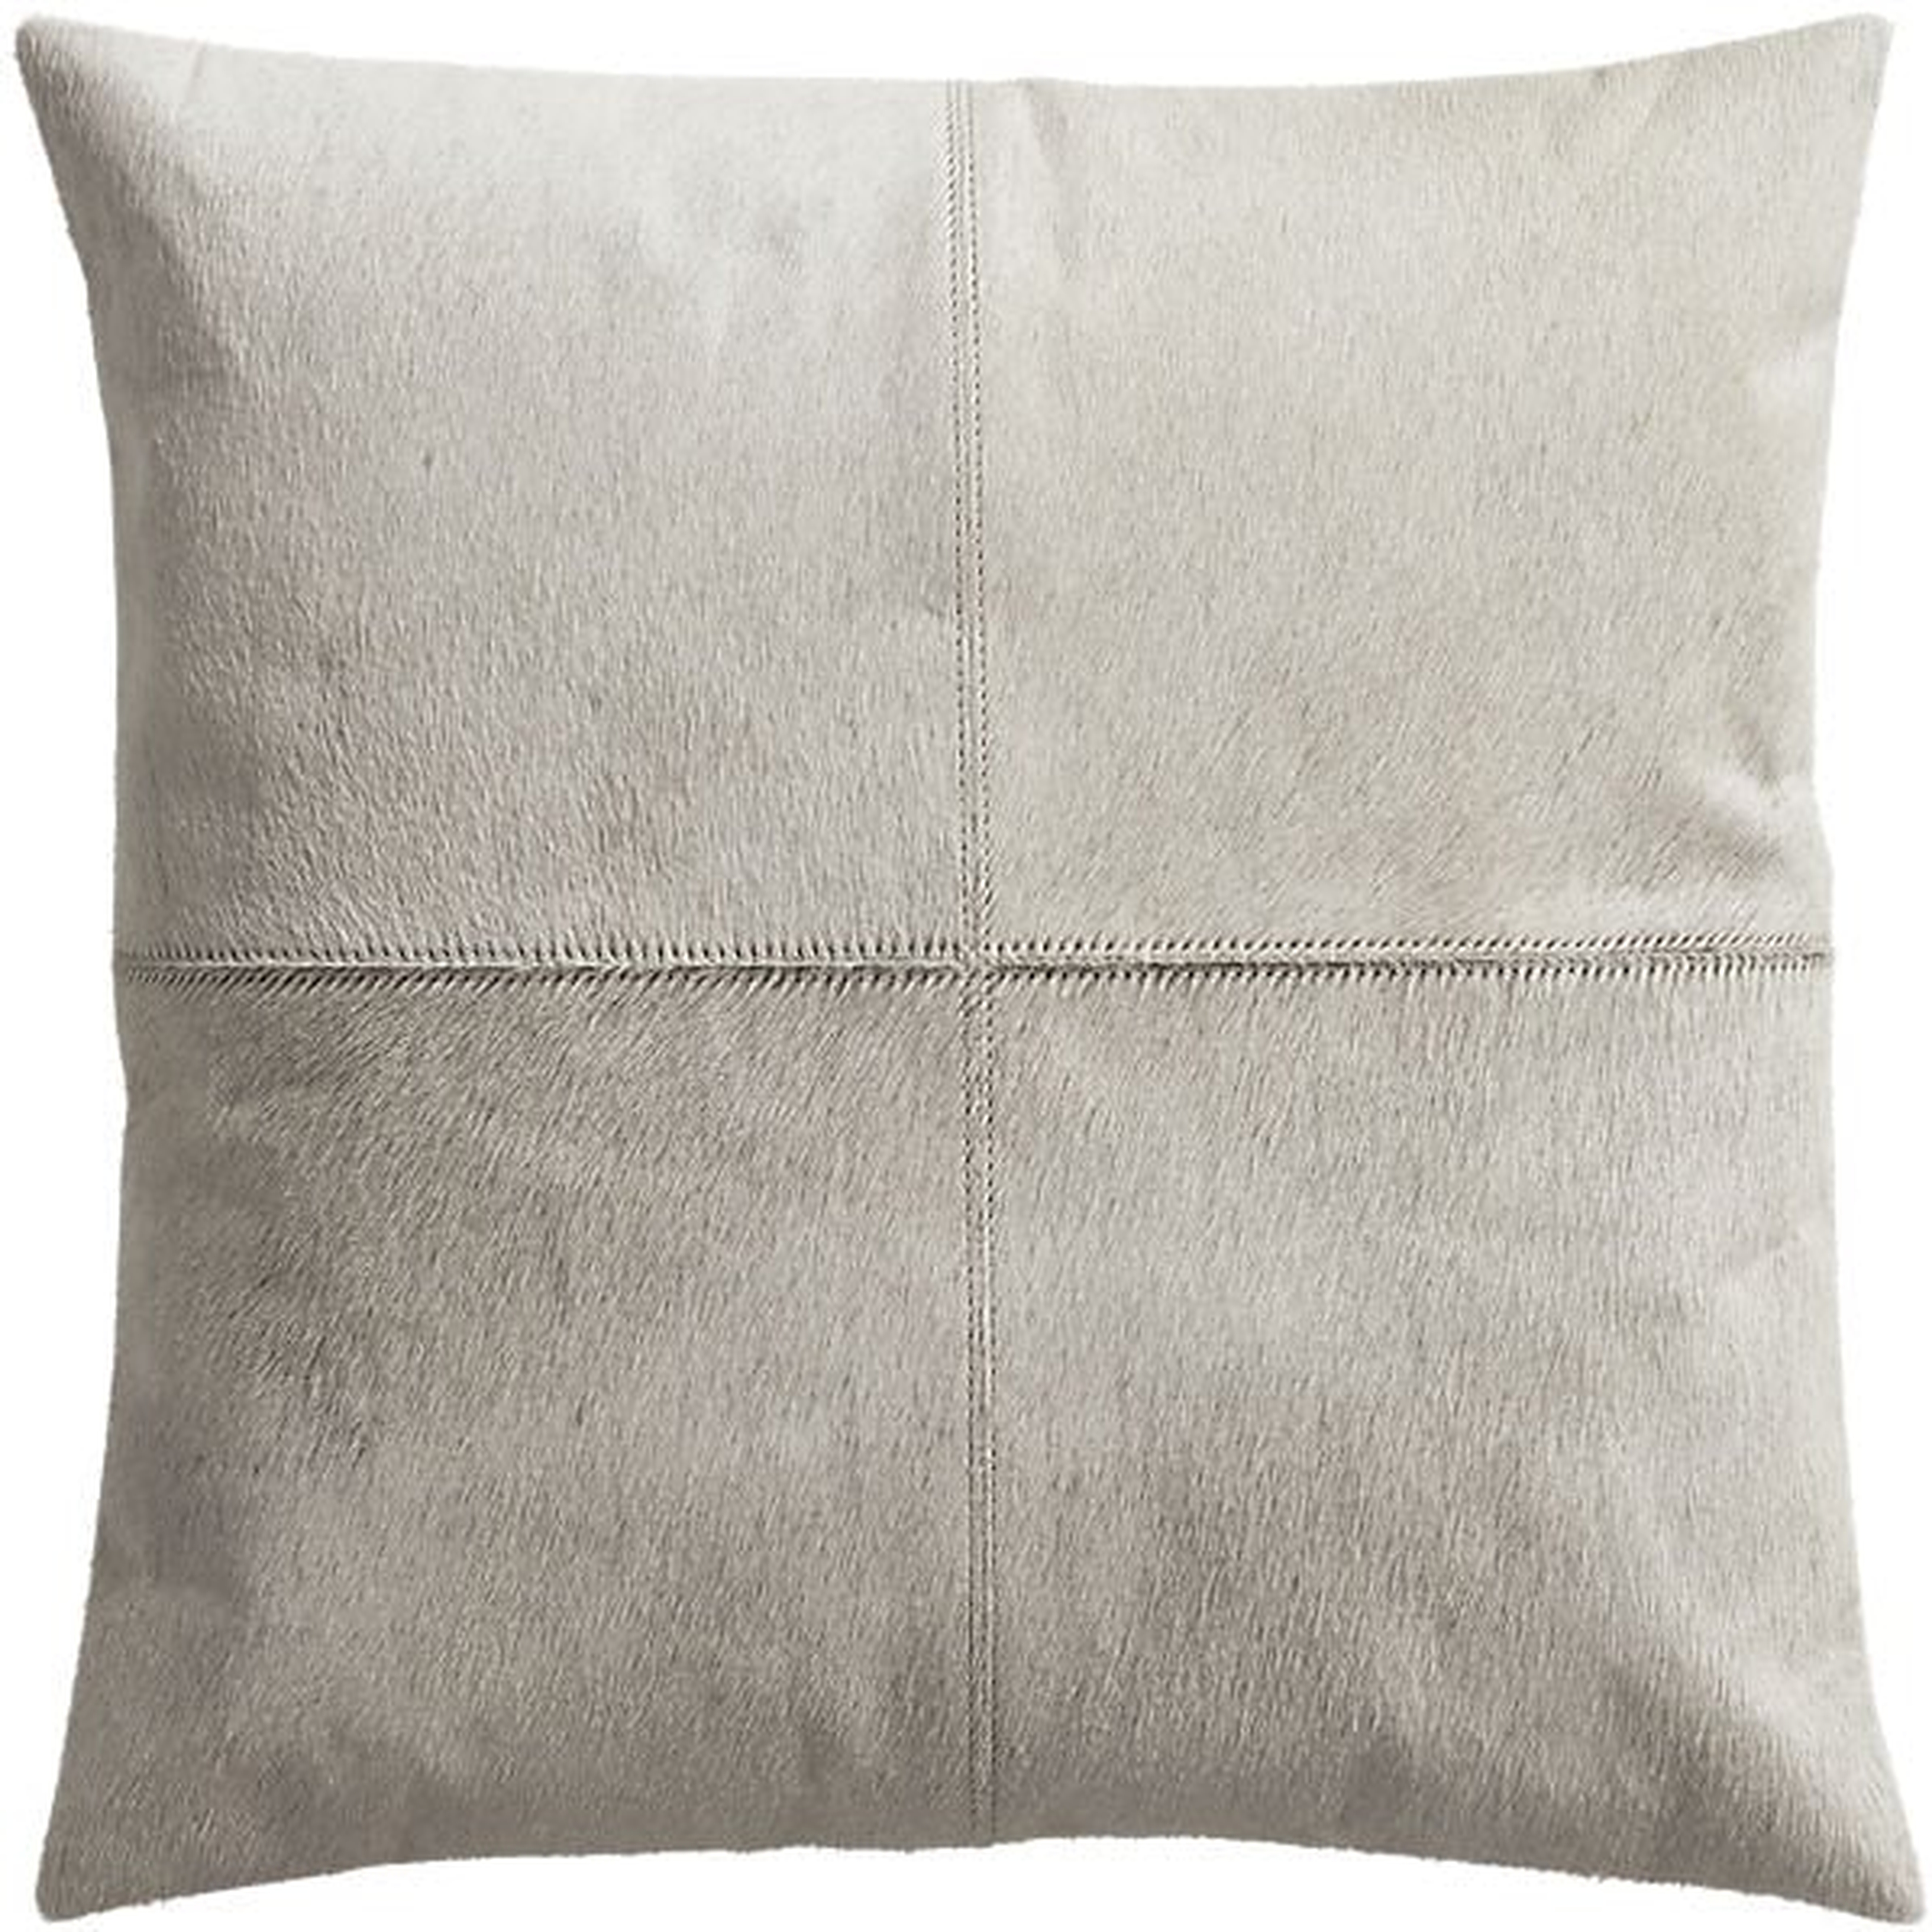 abele 18" pillow with down-alternative insert - CB2